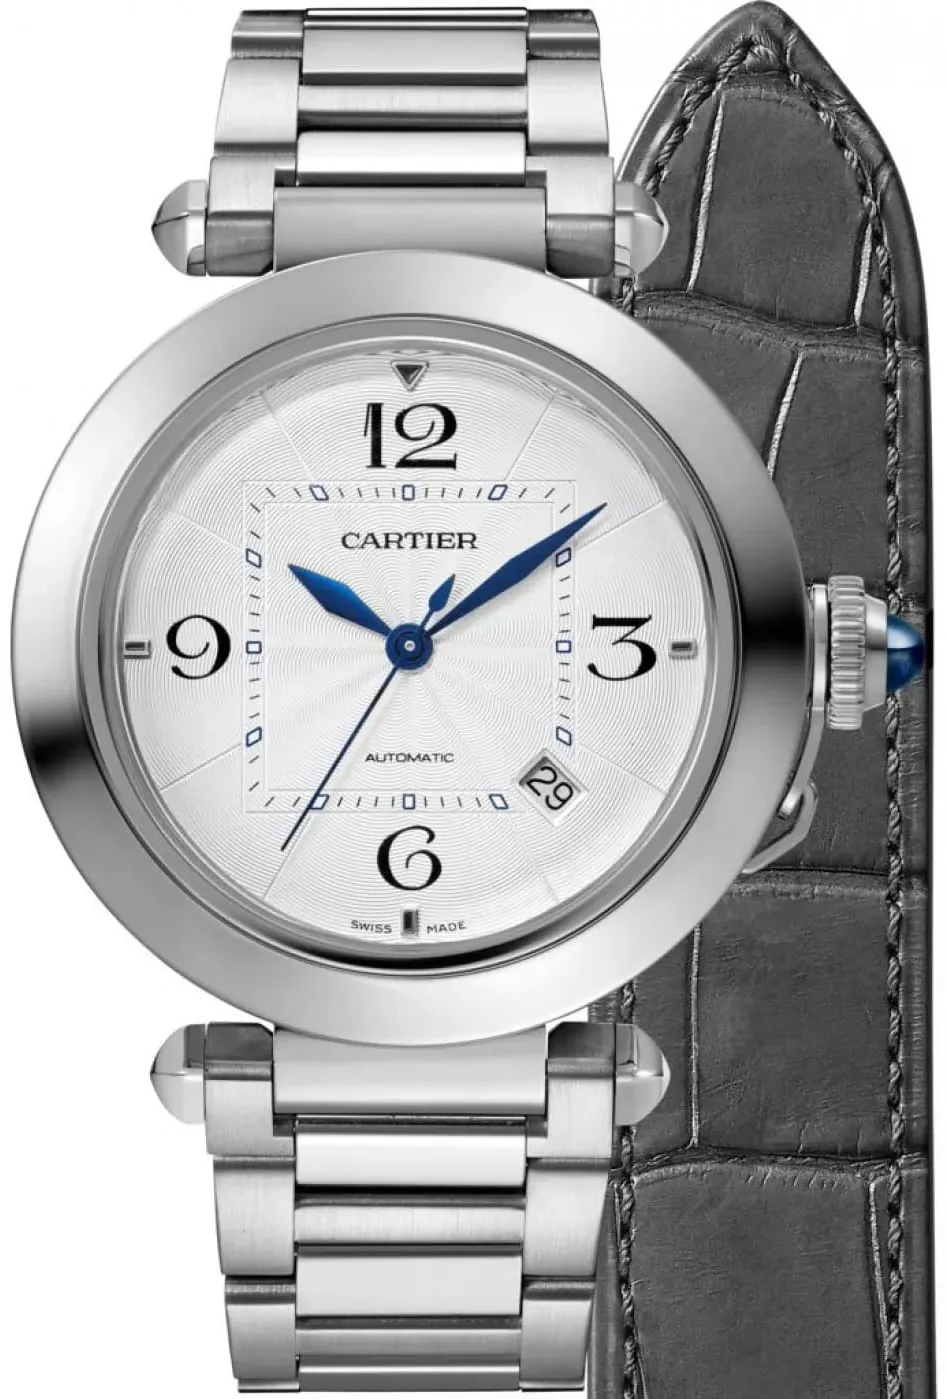 Cartier Pasha WSPA0013 35mm Stainless steel Silver